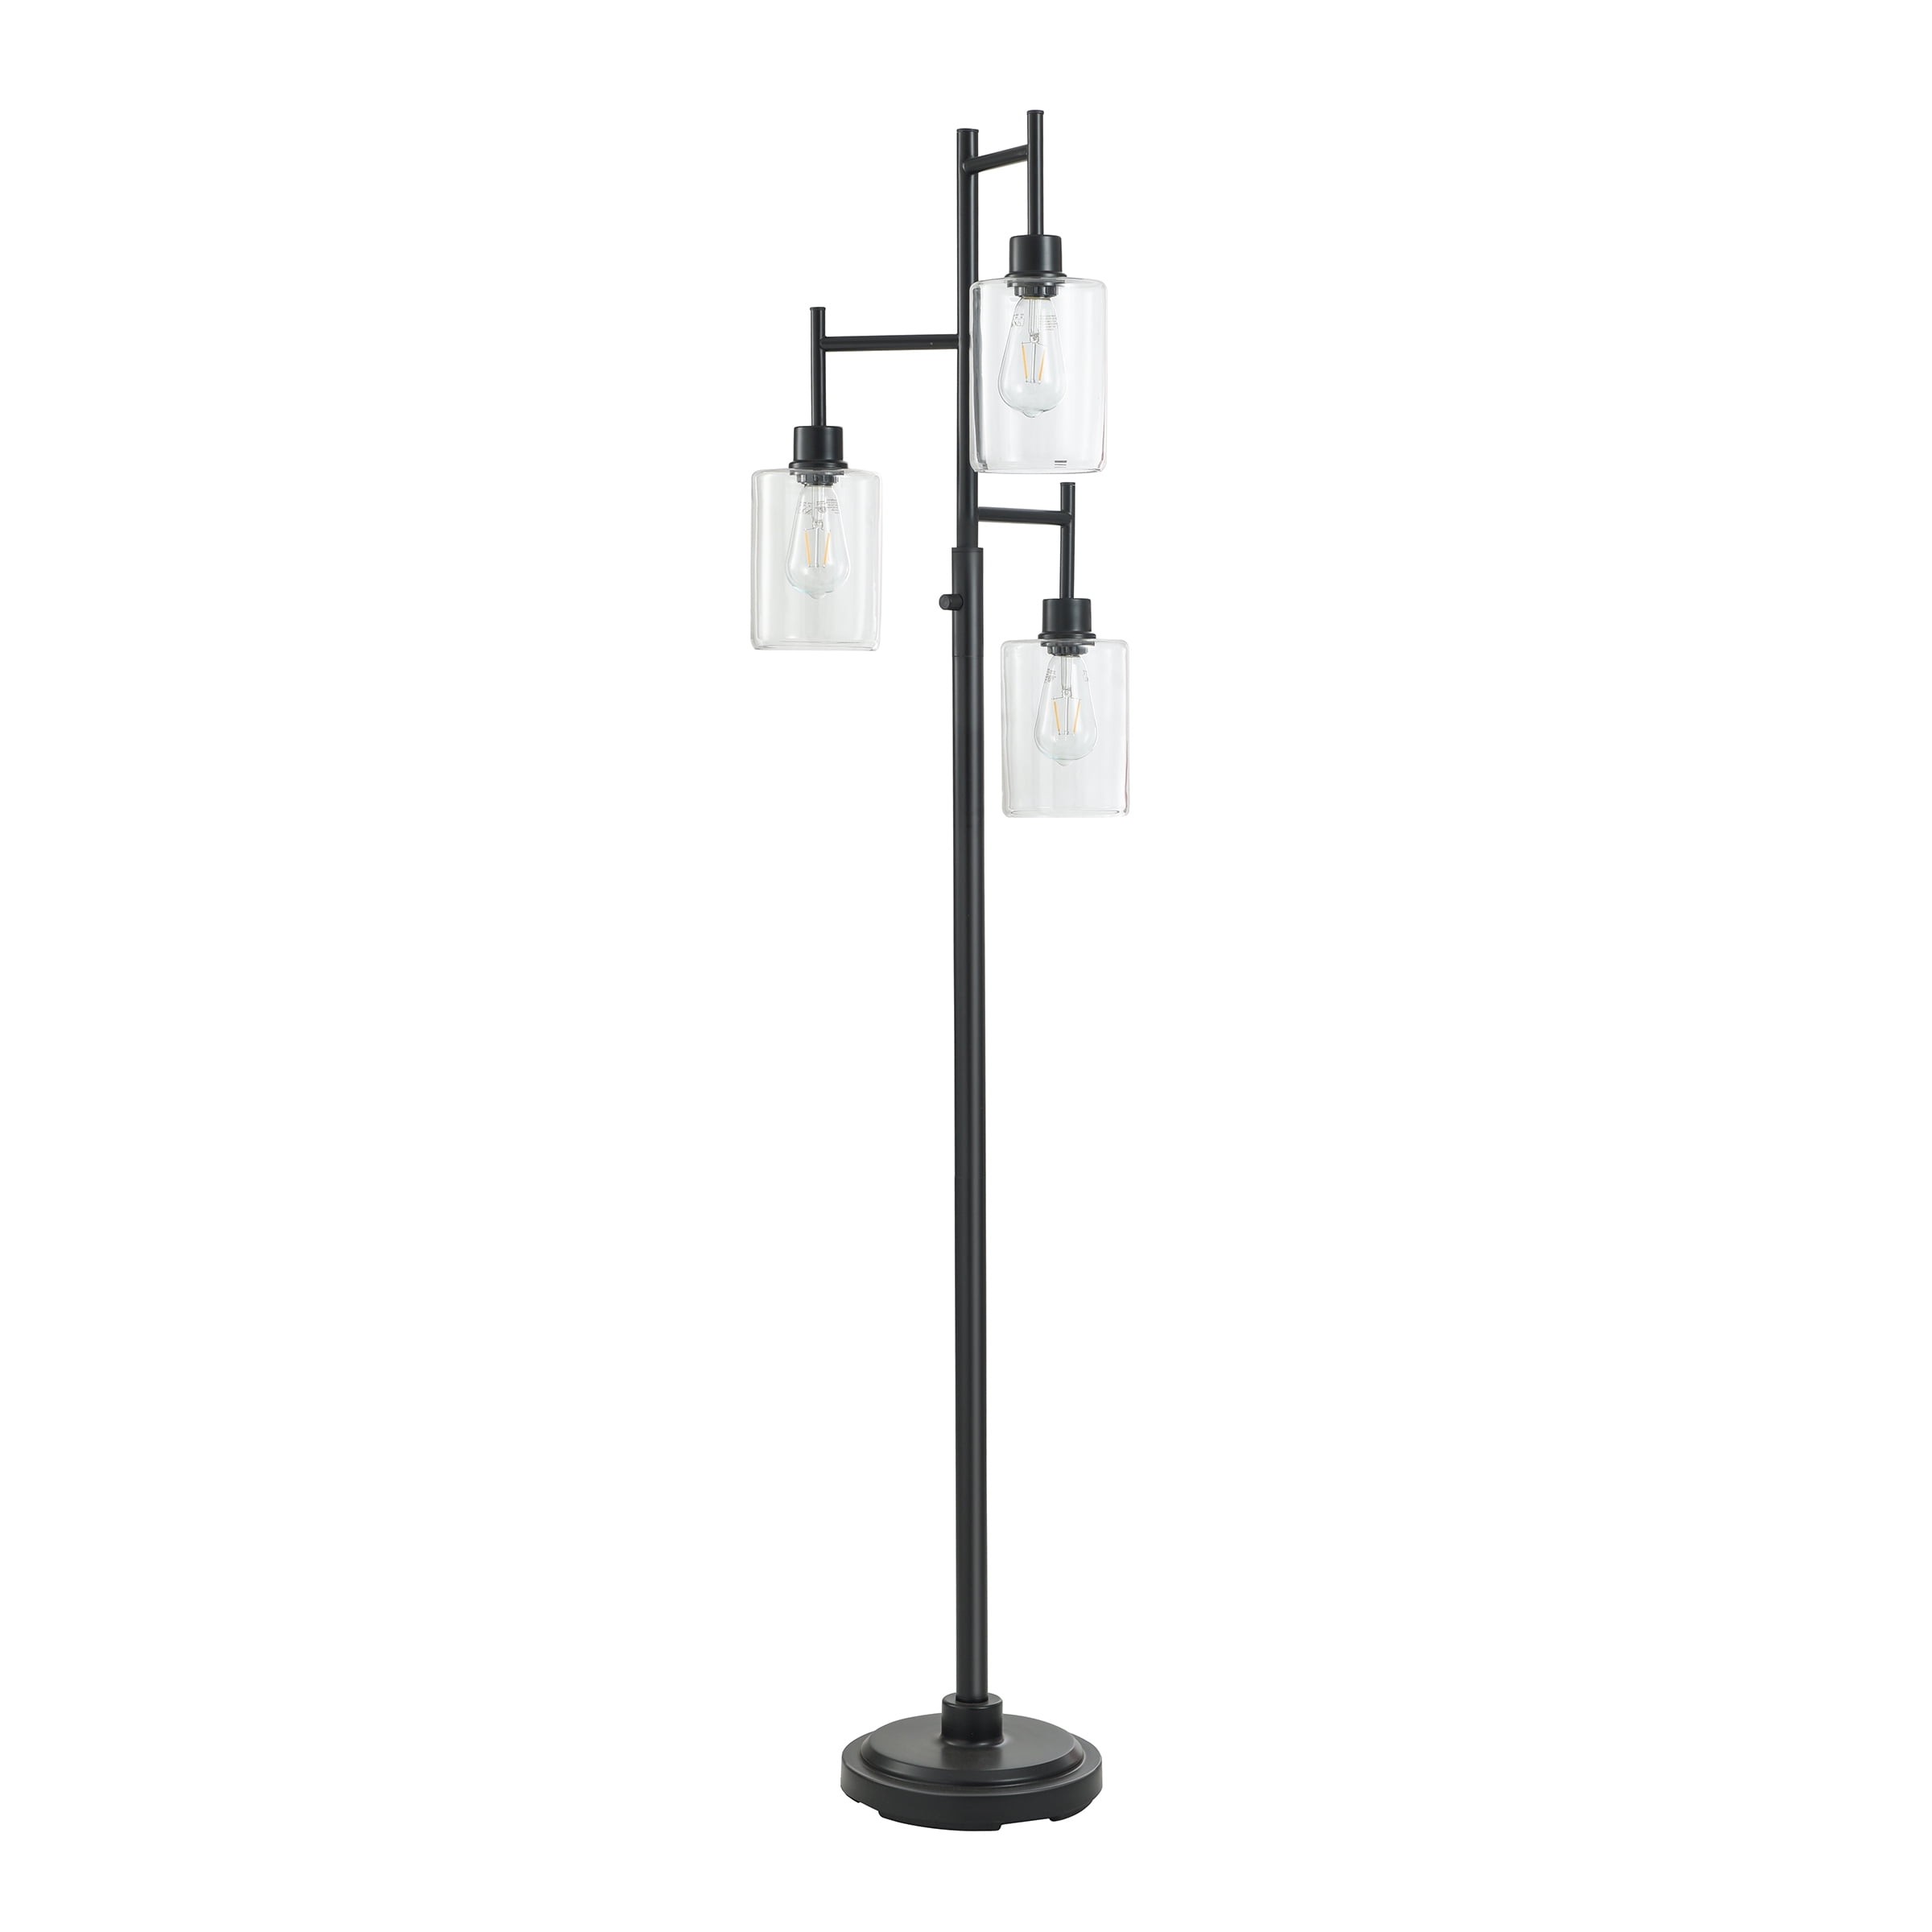 Better Homes and Gardens Black 3-Tier Floor Lamp with Glass Shades 63.5"Height